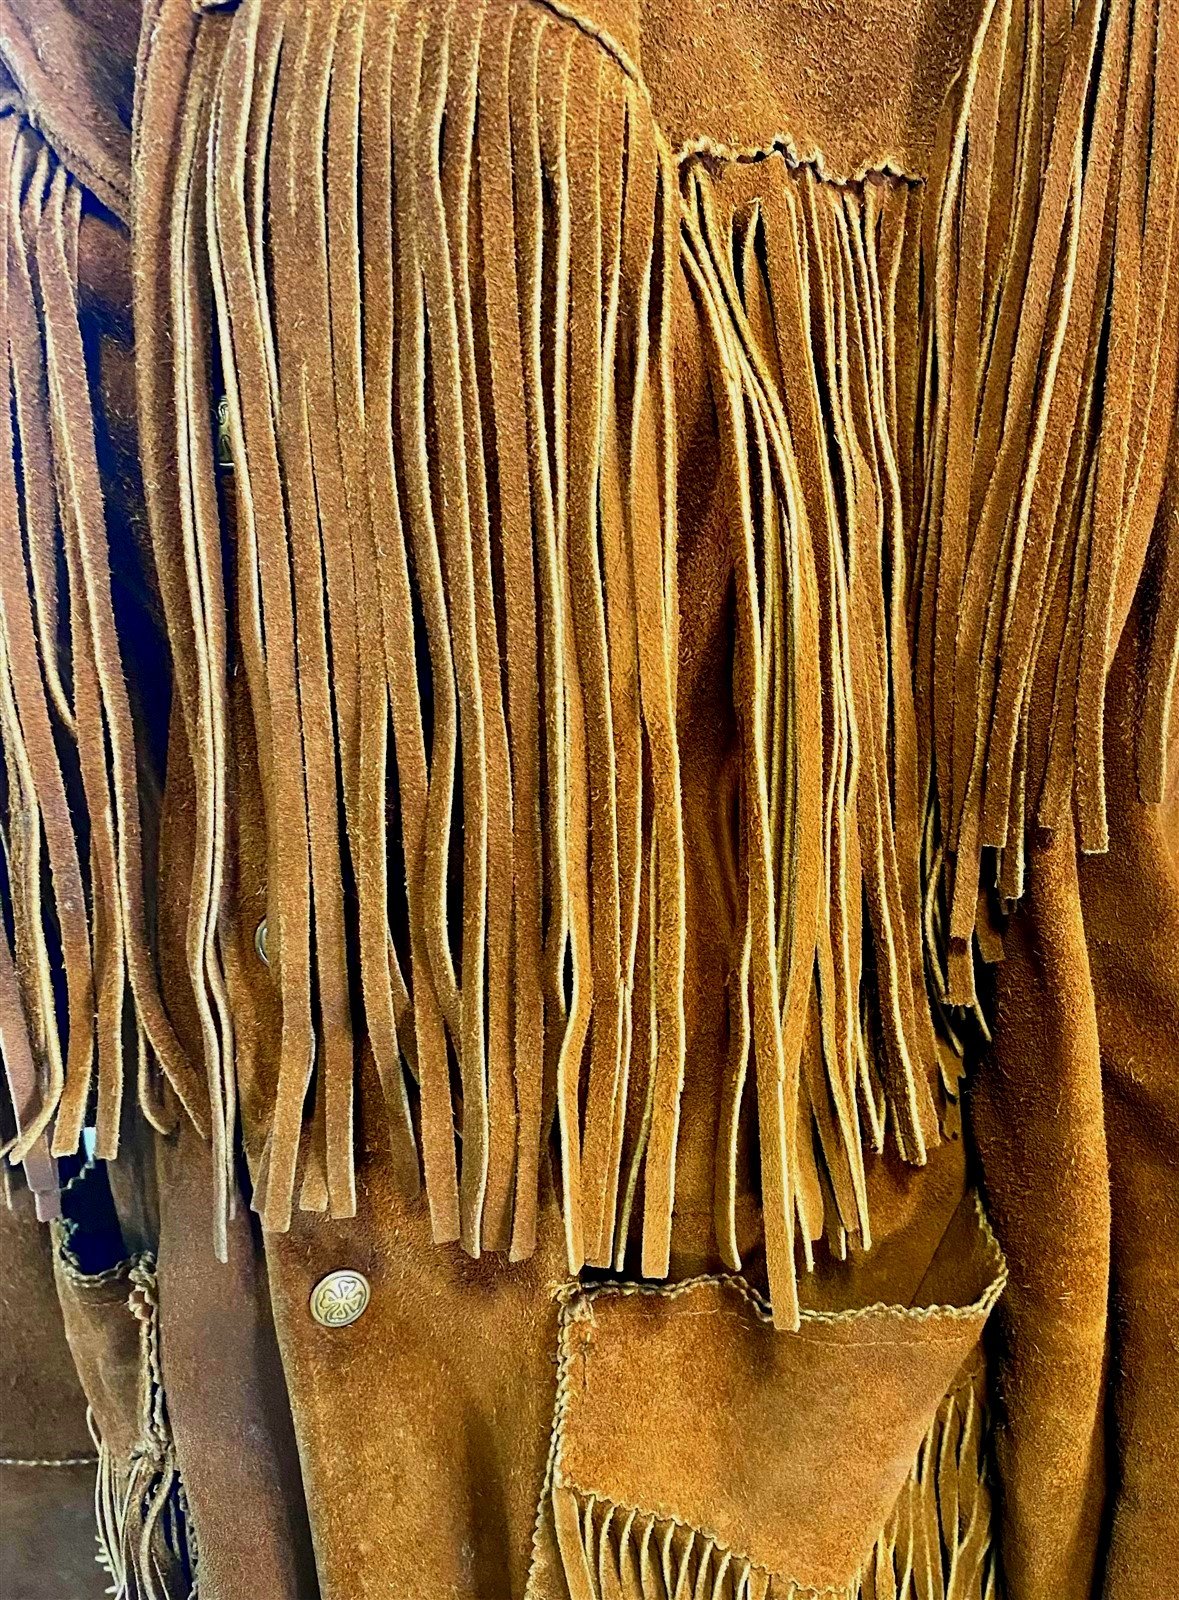 1970s Suede Leather Fringe Tregg's Westernwear Jacket (Worn by a Rock Band)